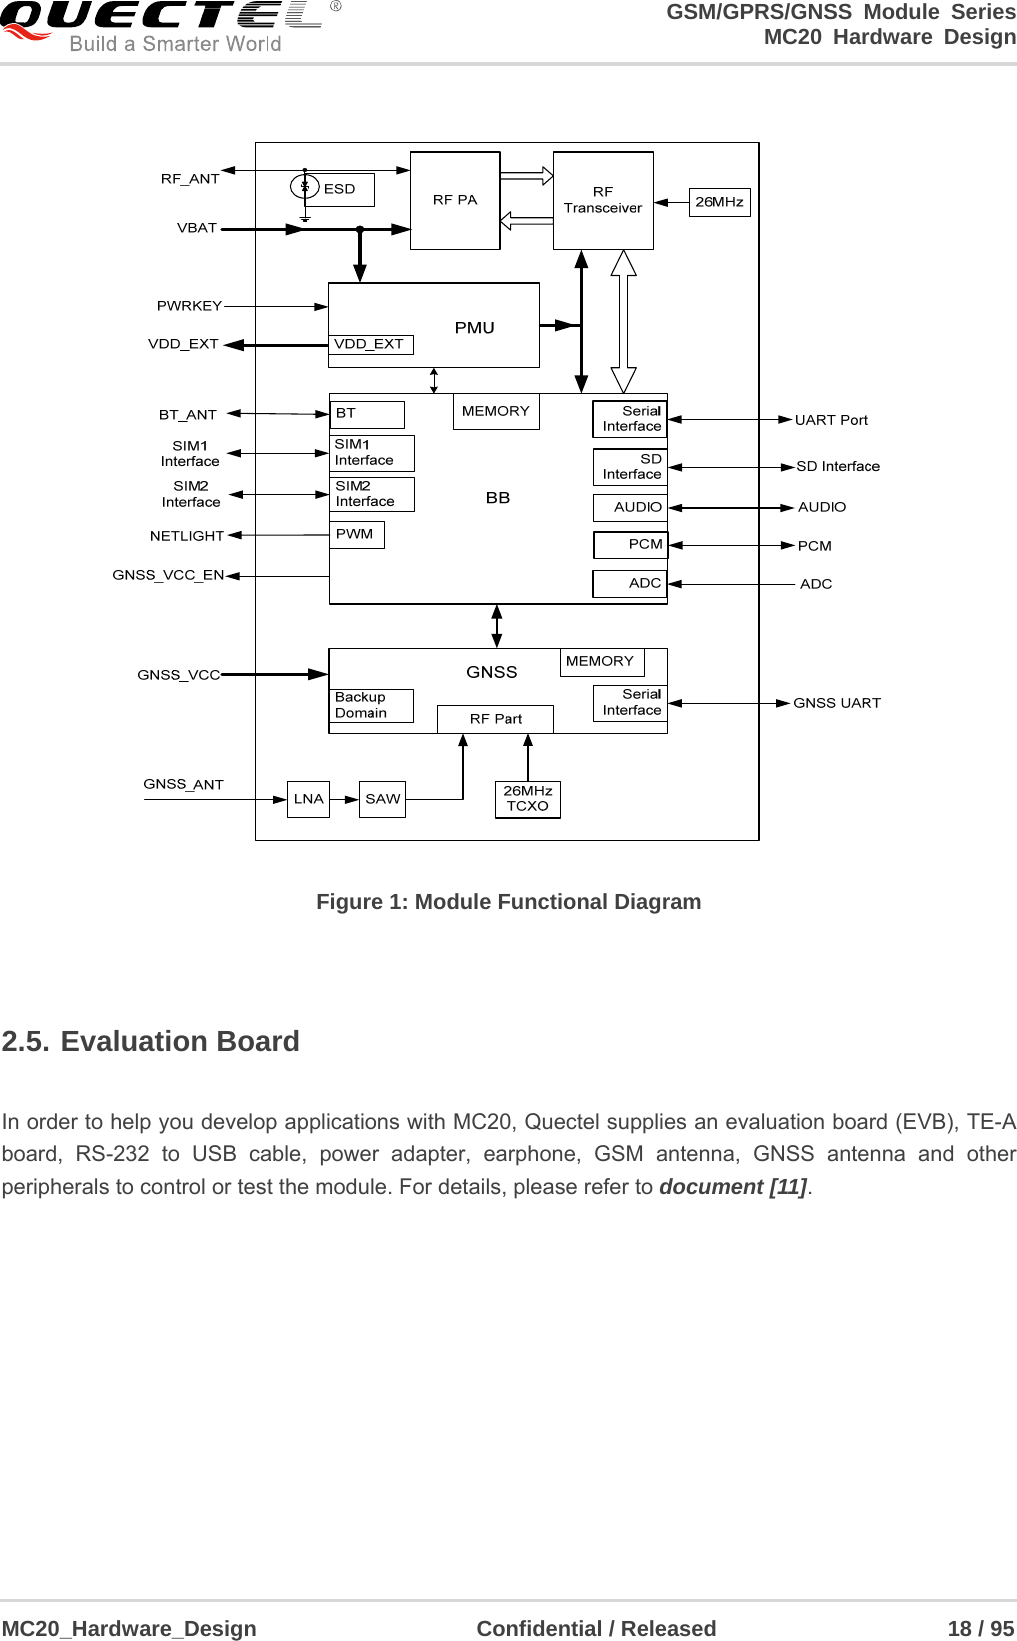                                                                     GSM/GPRS/GNSS Module Series                                                                 MC20 Hardware Design  MC20_Hardware_Design                    Confidential / Released                     18 / 95                         Figure 1: Module Functional Diagram  2.5. Evaluation Board  In order to help you develop applications with MC20, Quectel supplies an evaluation board (EVB), TE-A board, RS-232 to USB cable, power adapter, earphone, GSM antenna, GNSS antenna and other peripherals to control or test the module. For details, please refer to document [11].   